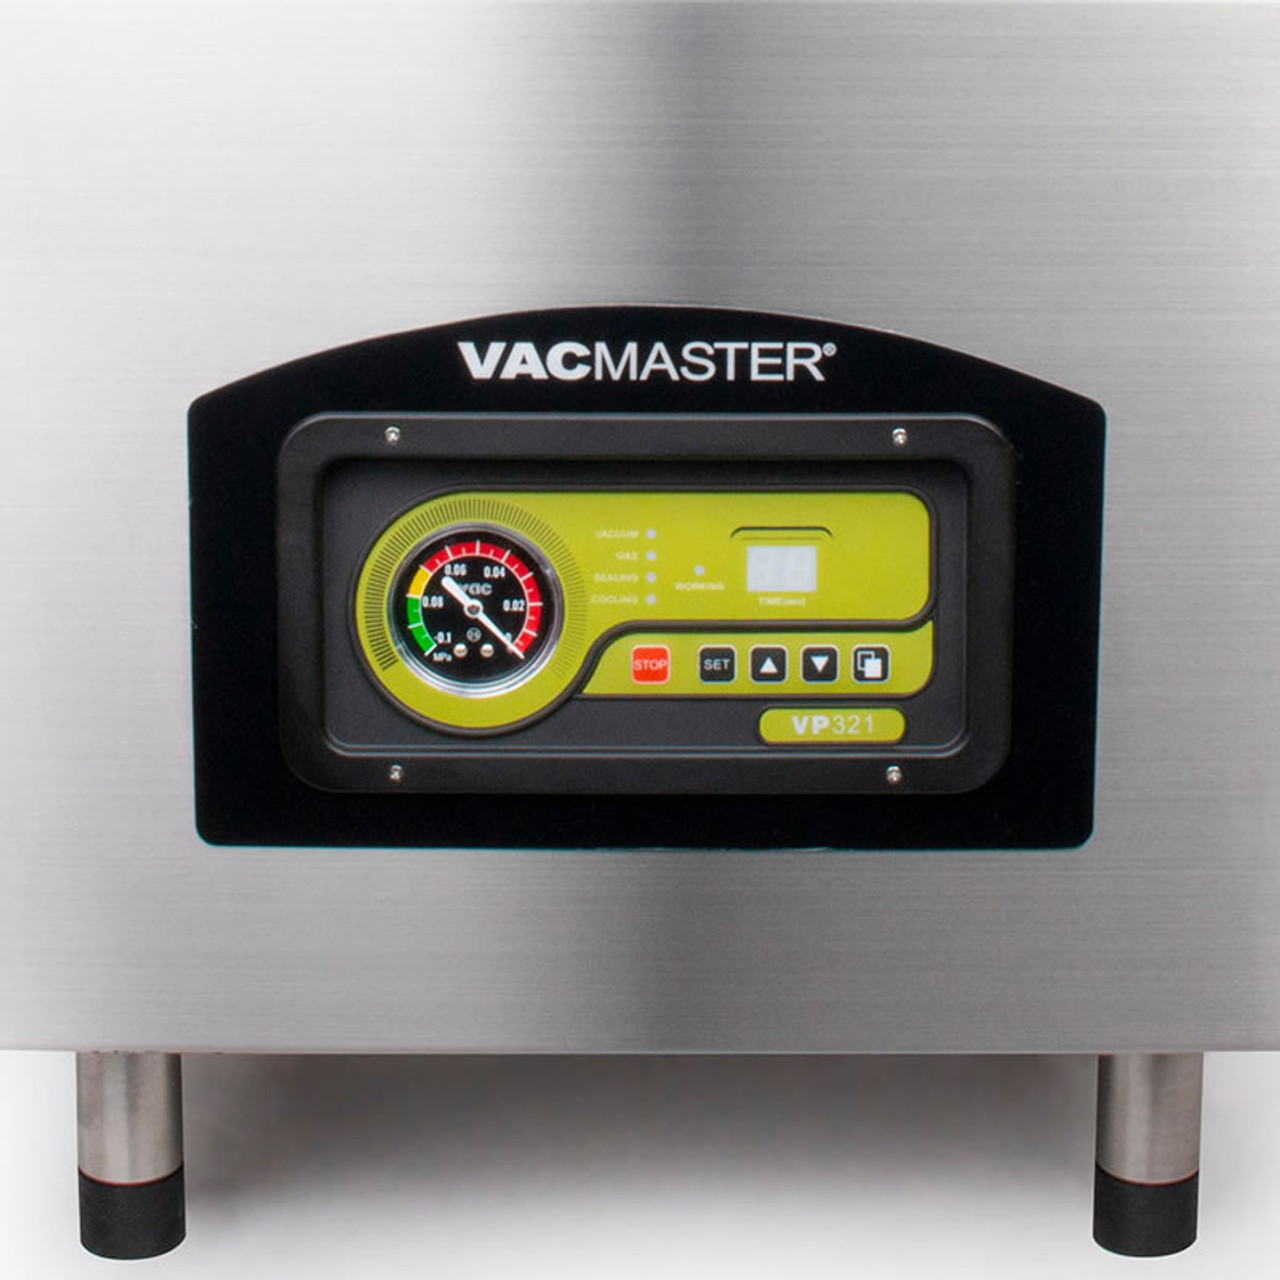 Vacmaster VP800 Commercial Double Chamber Vacuum Sealer with GAS Flush